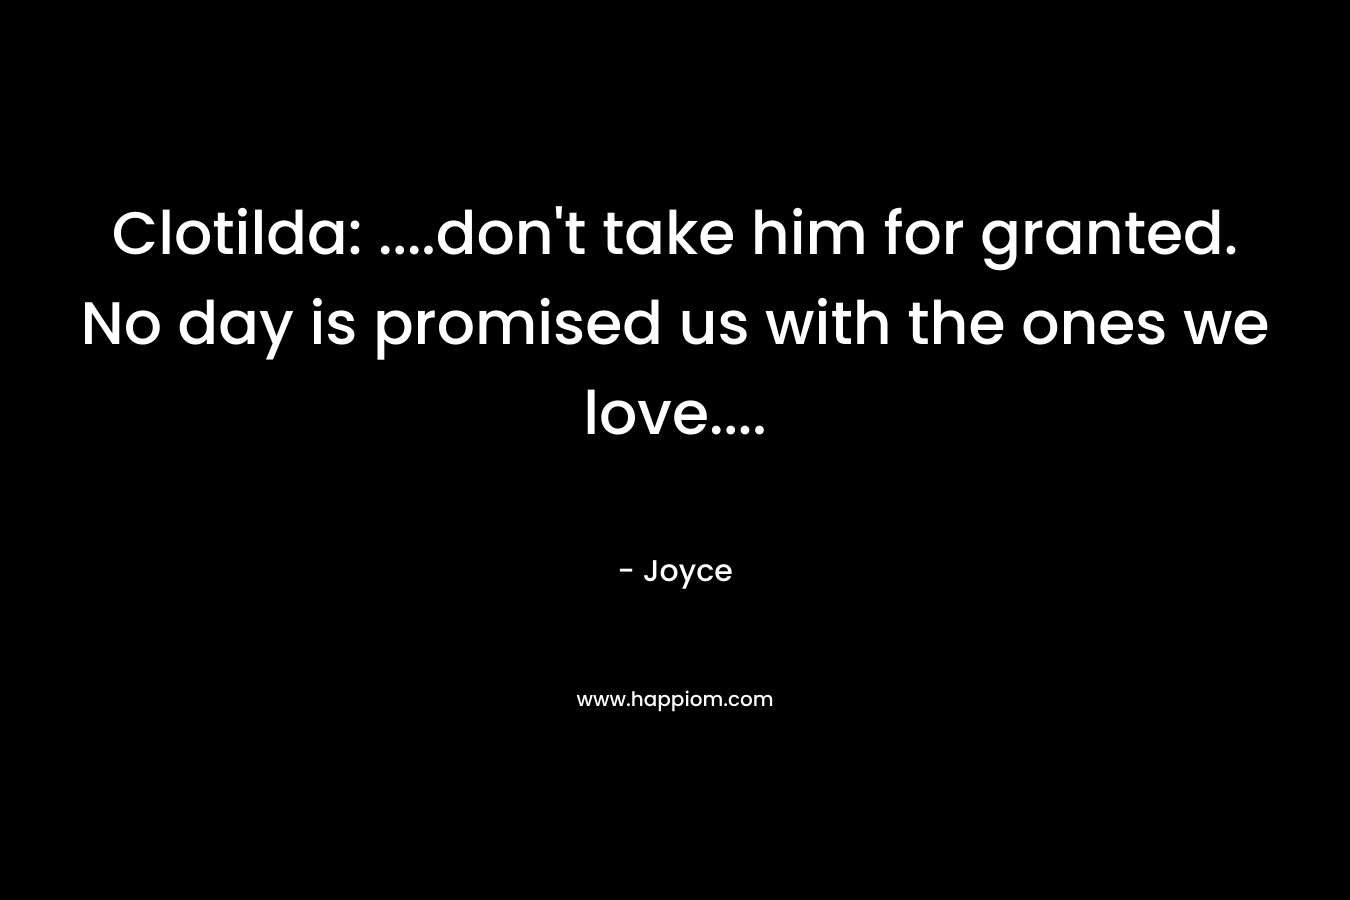 Clotilda: ....don't take him for granted. No day is promised us with the ones we love....